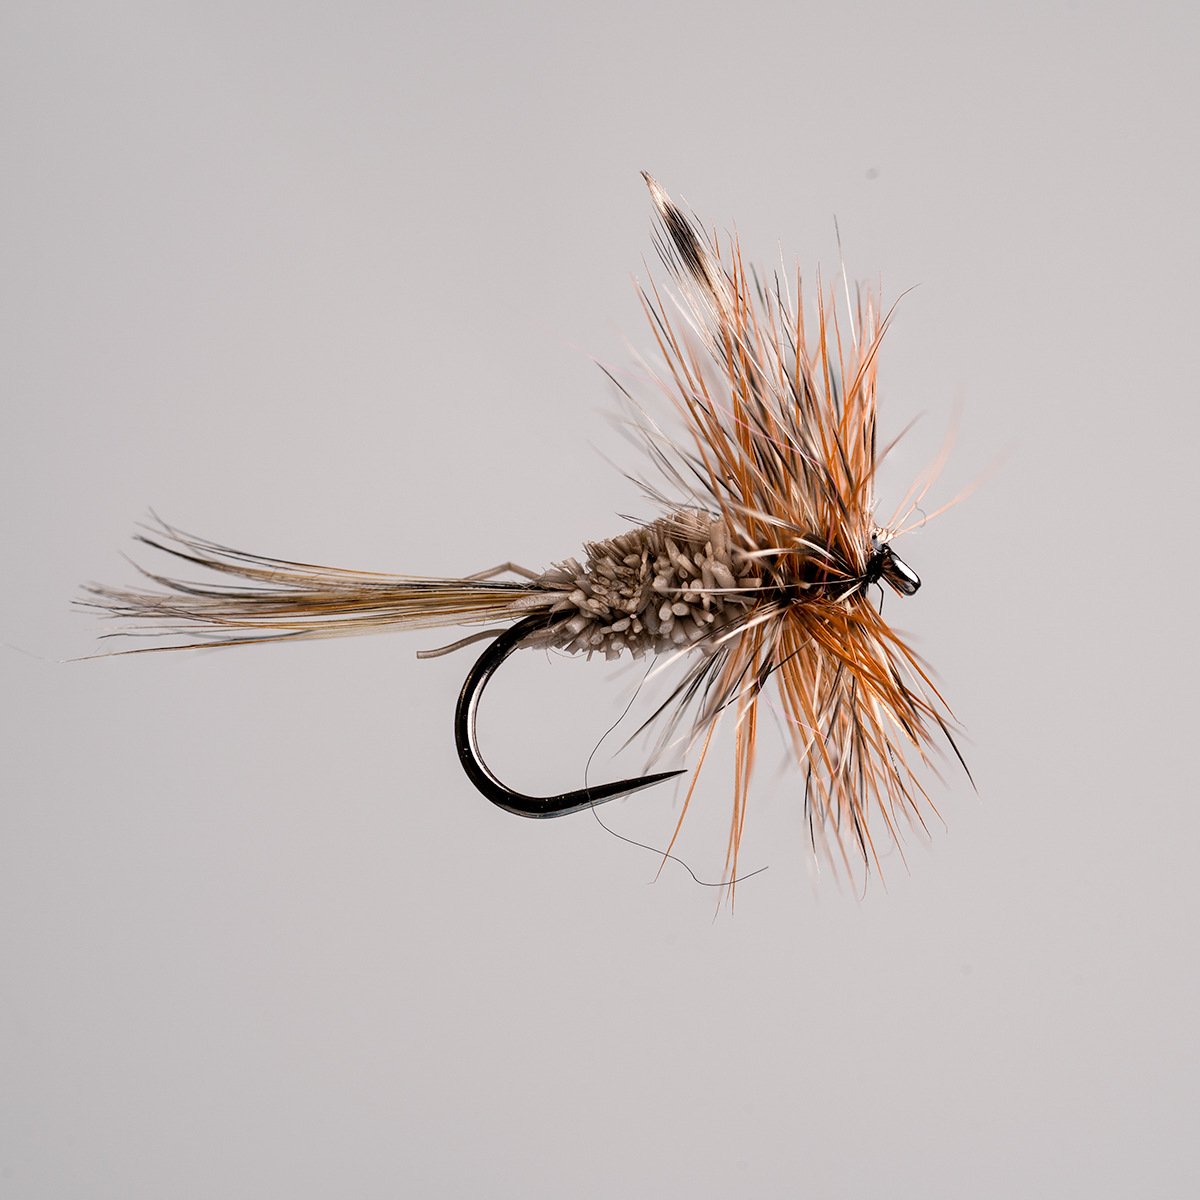 Barbless Adams Irresistible Dry Trout Fly Fishing Flies By Dragonflies 